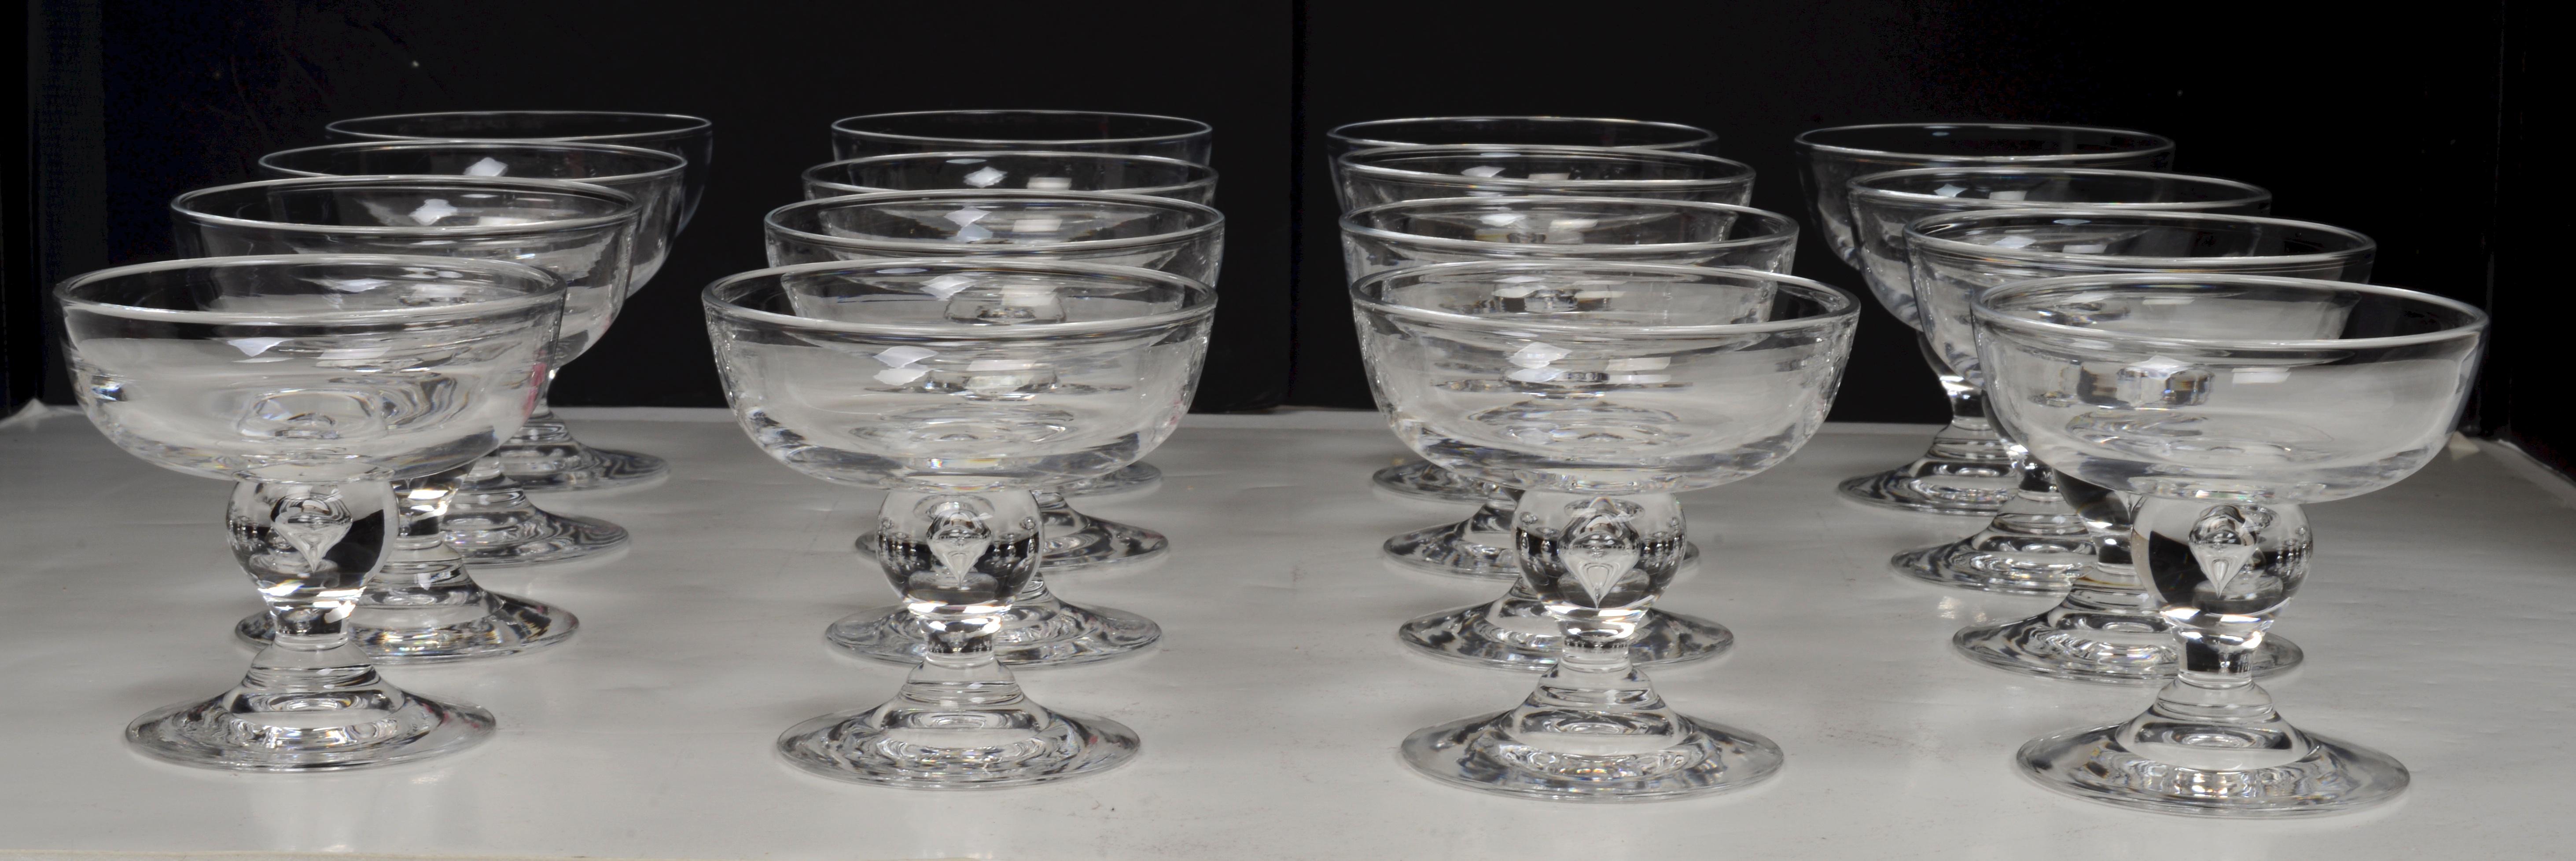 Mid-Century Modern Set of 16 George Thompson Designed Steuben Champagne/Coupe/Tall Sherbet Glasses For Sale